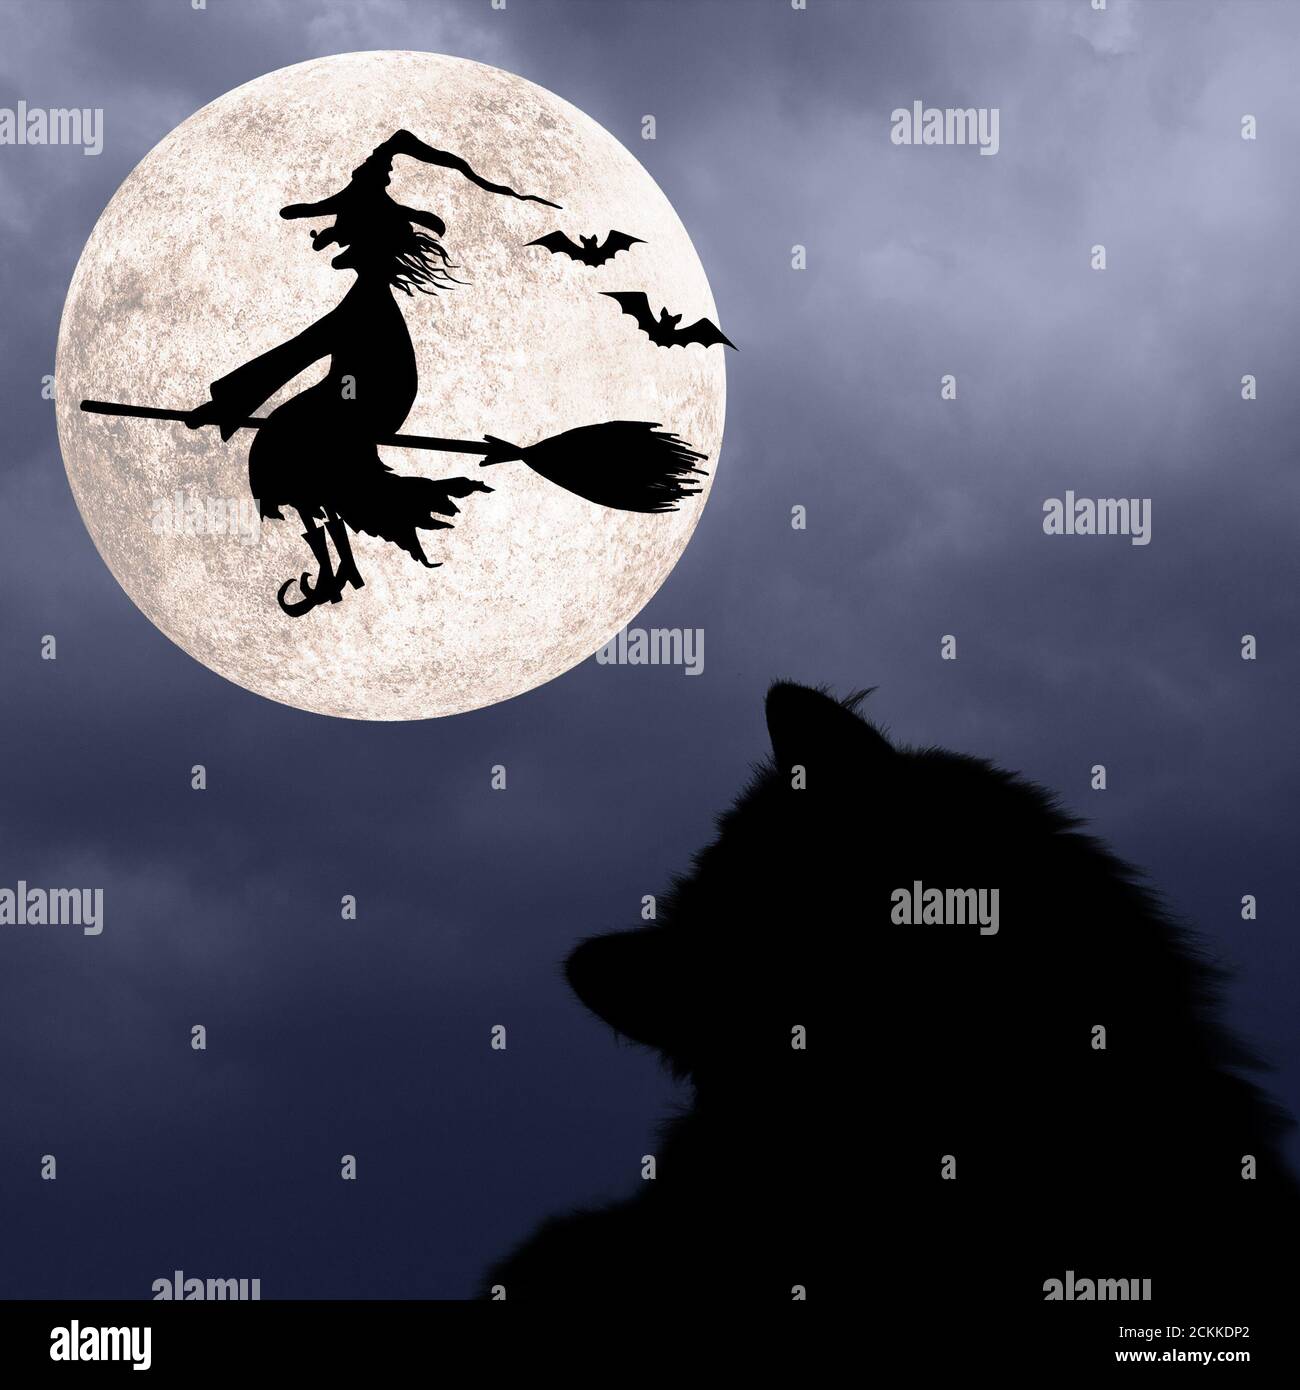 Halloween square background with silhouettes of black cat, bats, full moon and smiling wicked witch flying on broomstick with hat with a wart on the n Stock Photo